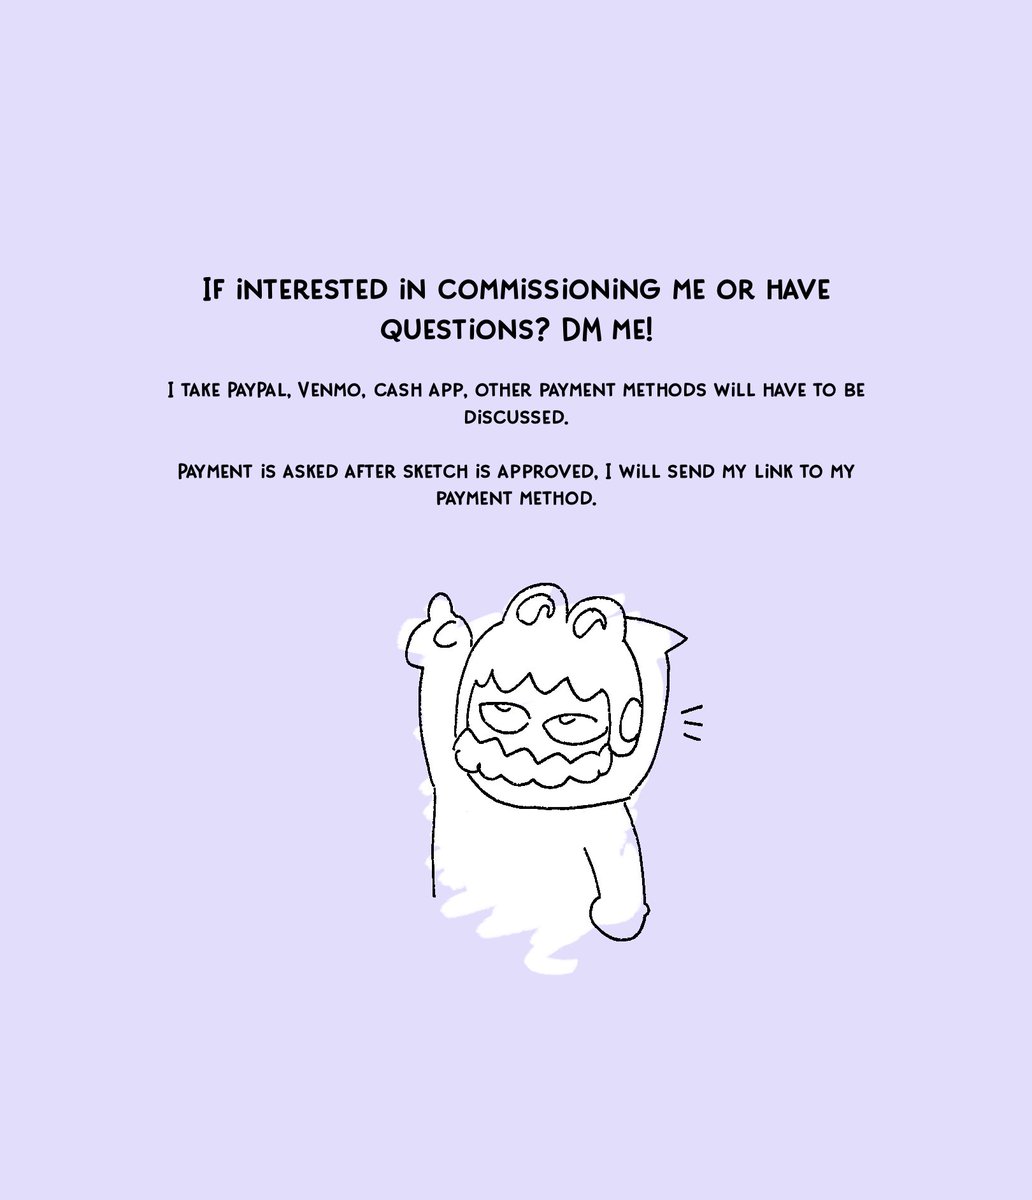 chcportfolio.wixsite.com/websitecommiss… chibi and emote commissions, more info in link about slots, DM if interested